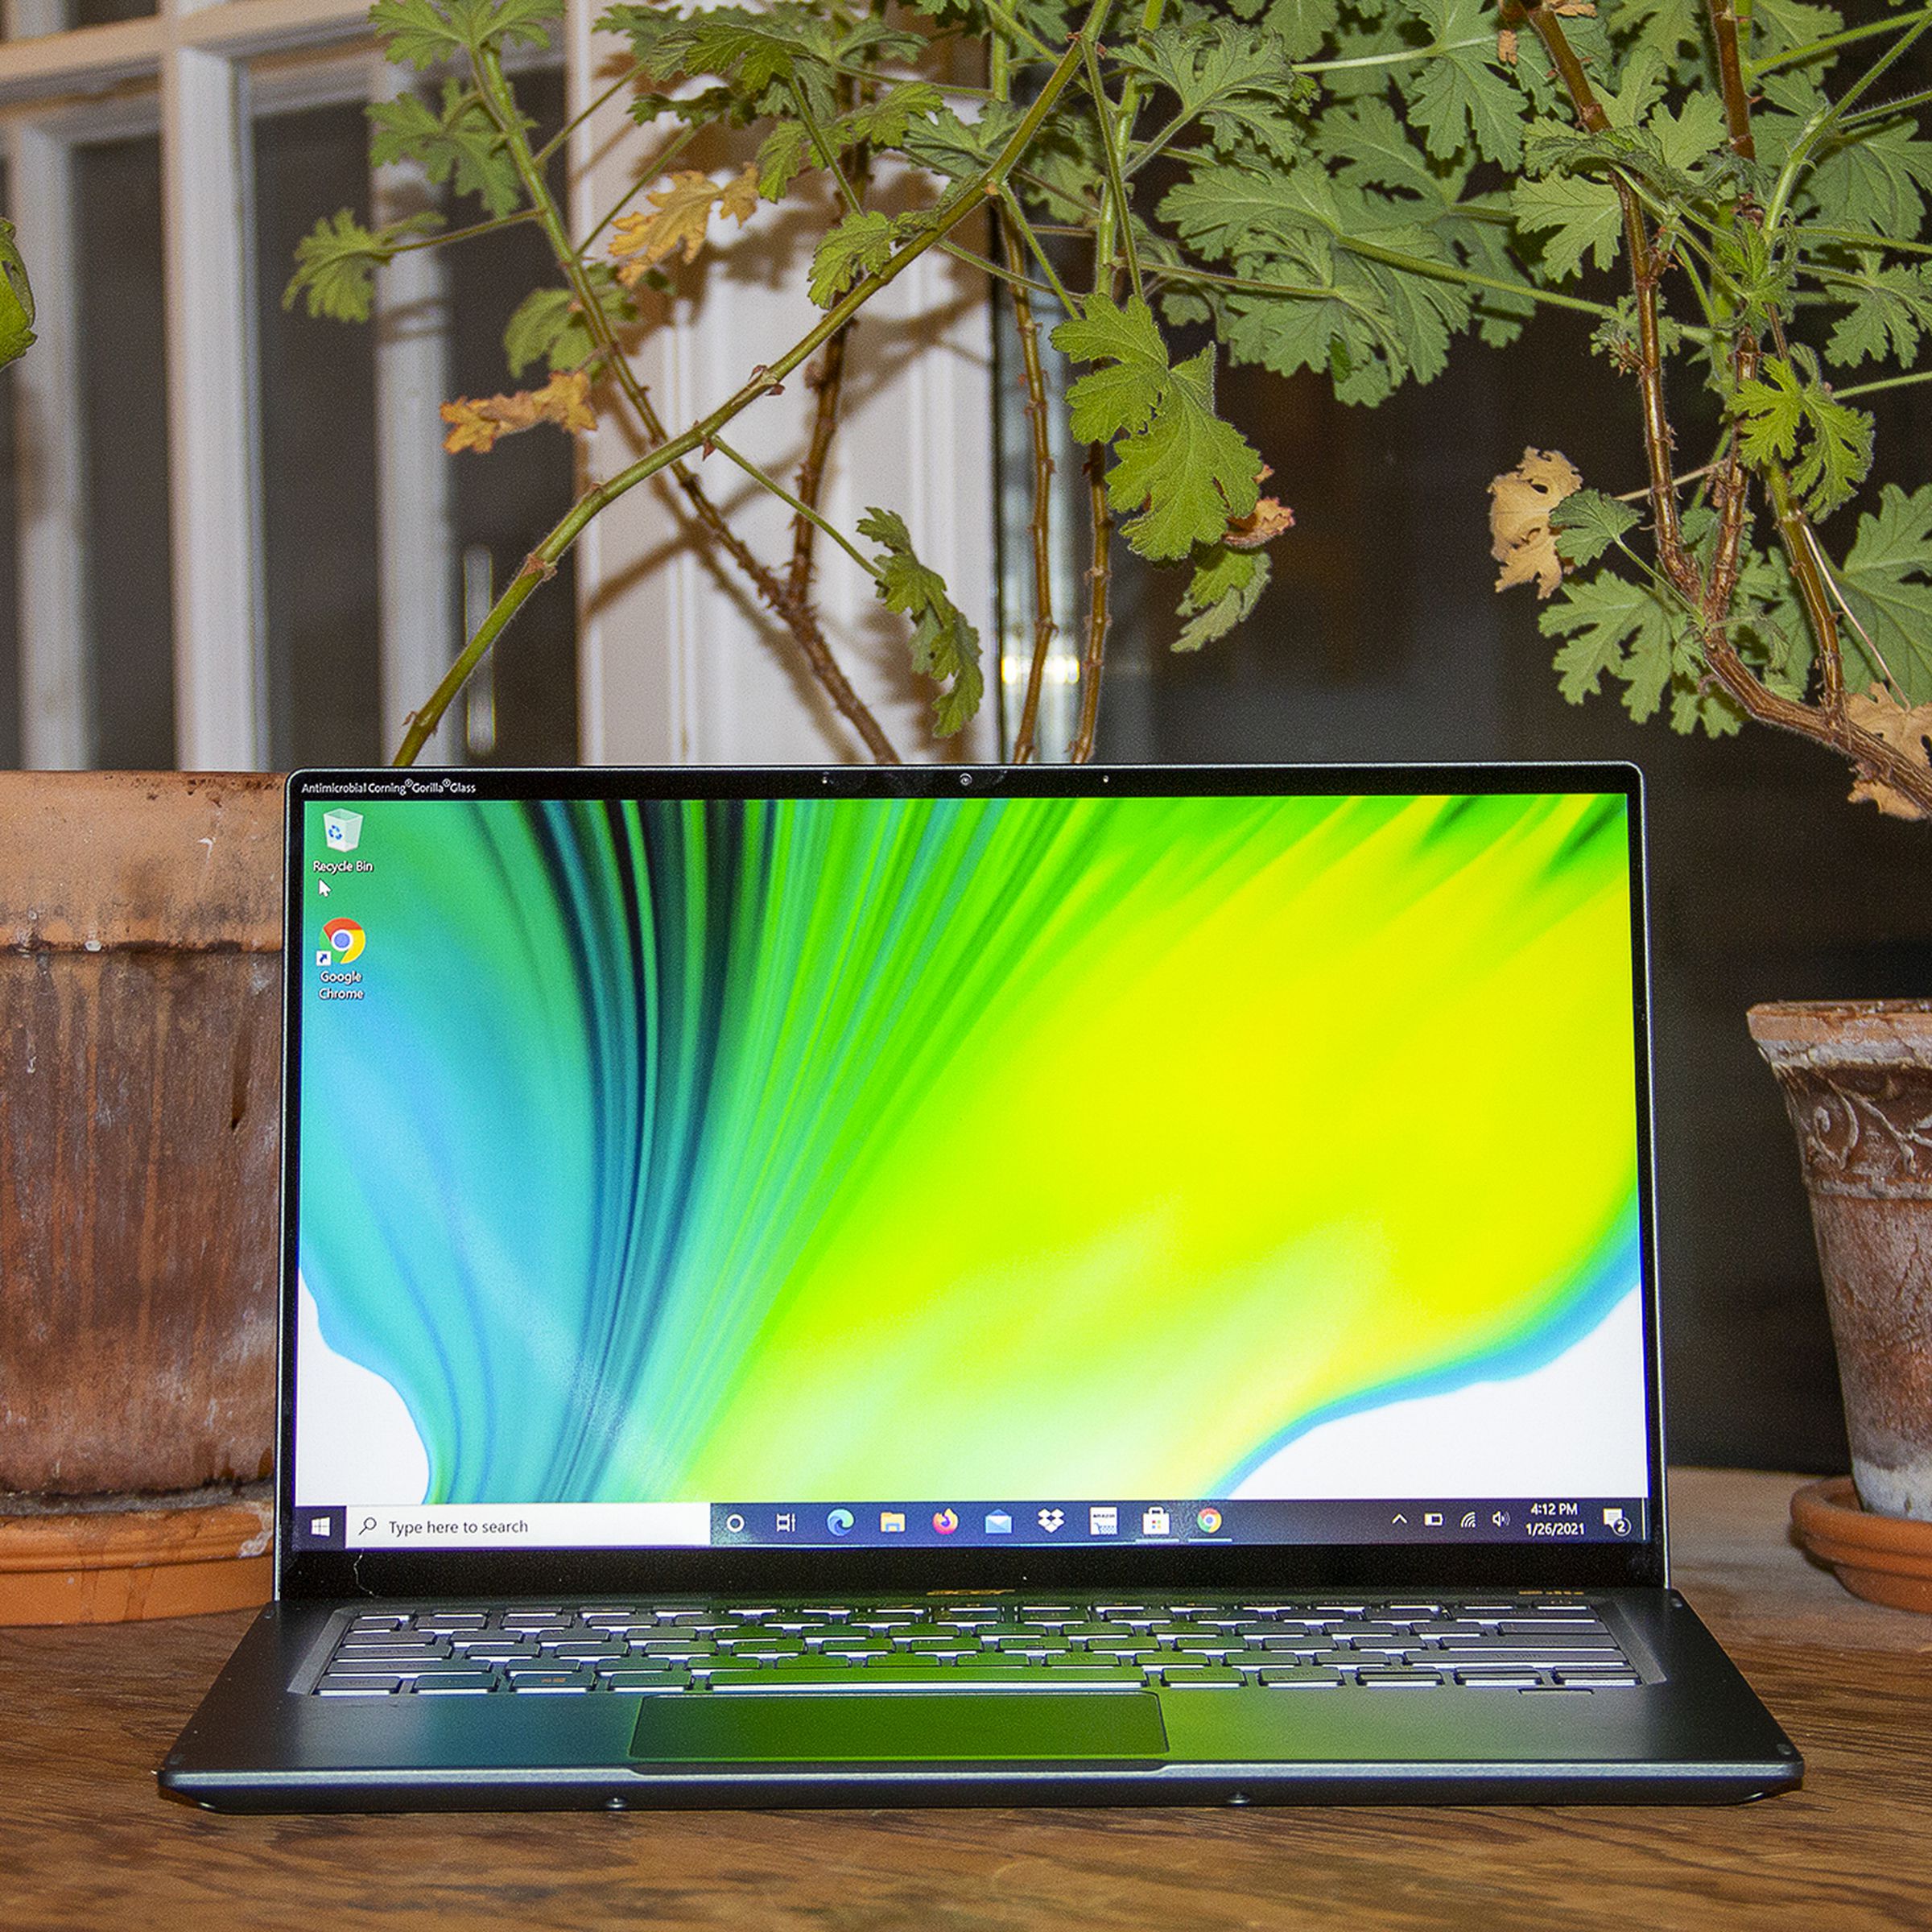 The Acer Swift 5 open, seen from the front. The screen depicts a green, blue, and white background.